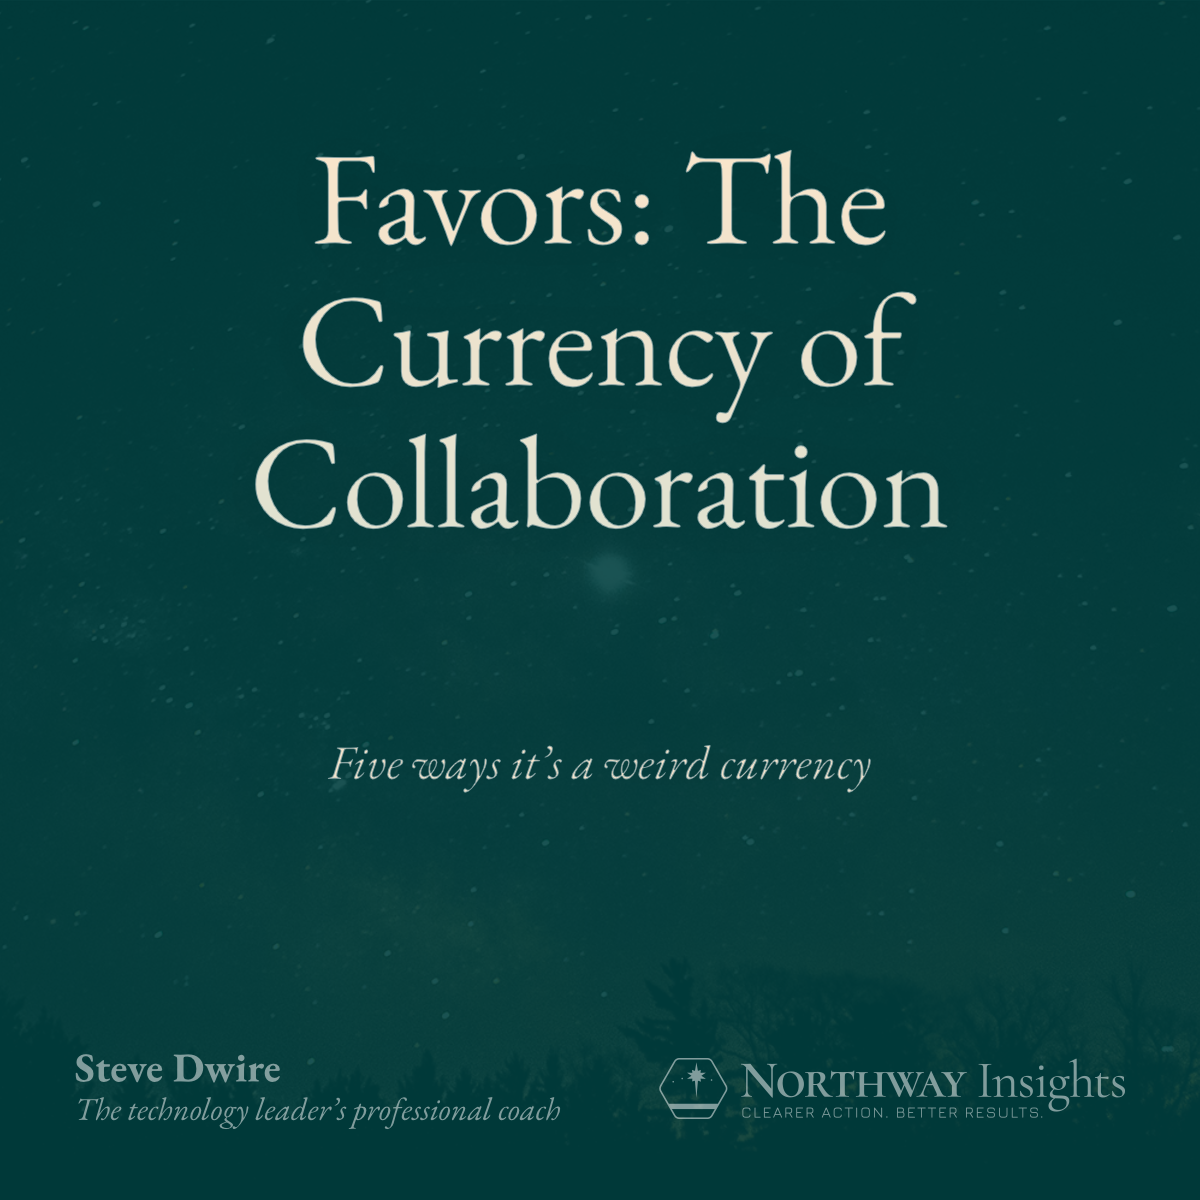 Favors: The Currency of Collaboration (Five ways it's a weird currency)